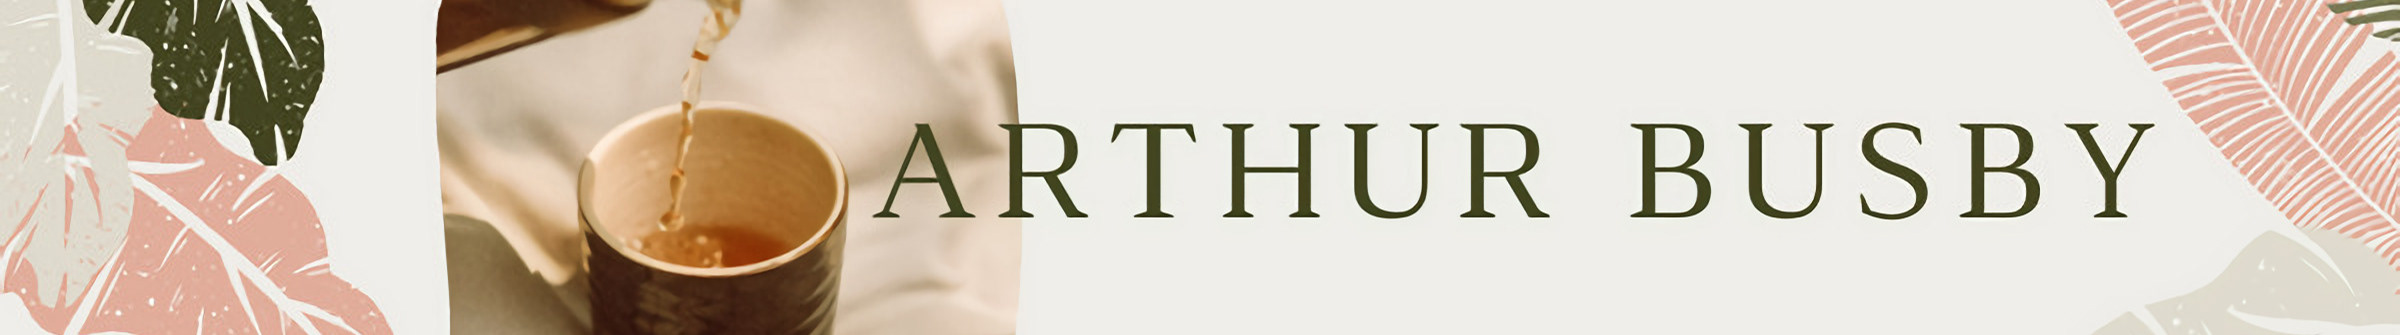 ArthurBusby Store's profile banner